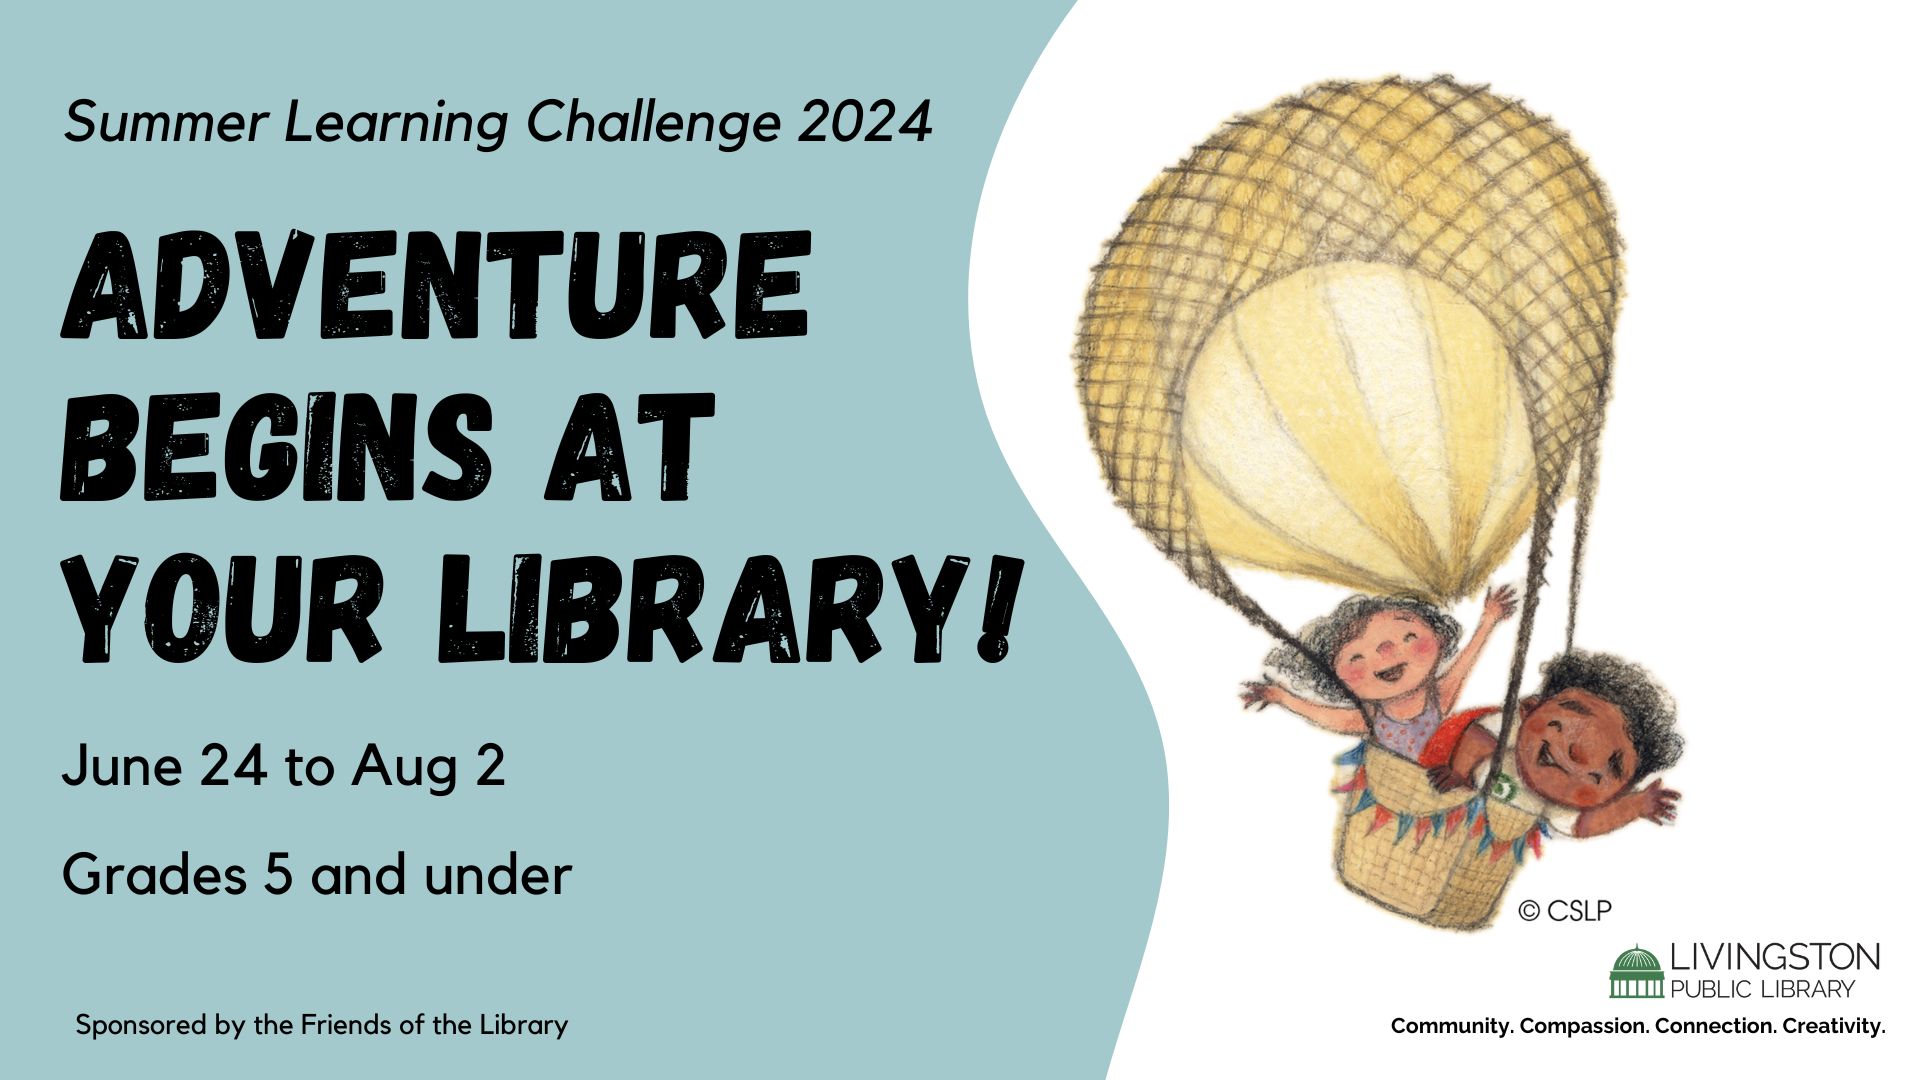 Drawing of two kids in a hot air balloon. Adventure begins at your library! June 24 to Aug 2. Summer Learning Challenge 2024. Grades 5 and under.